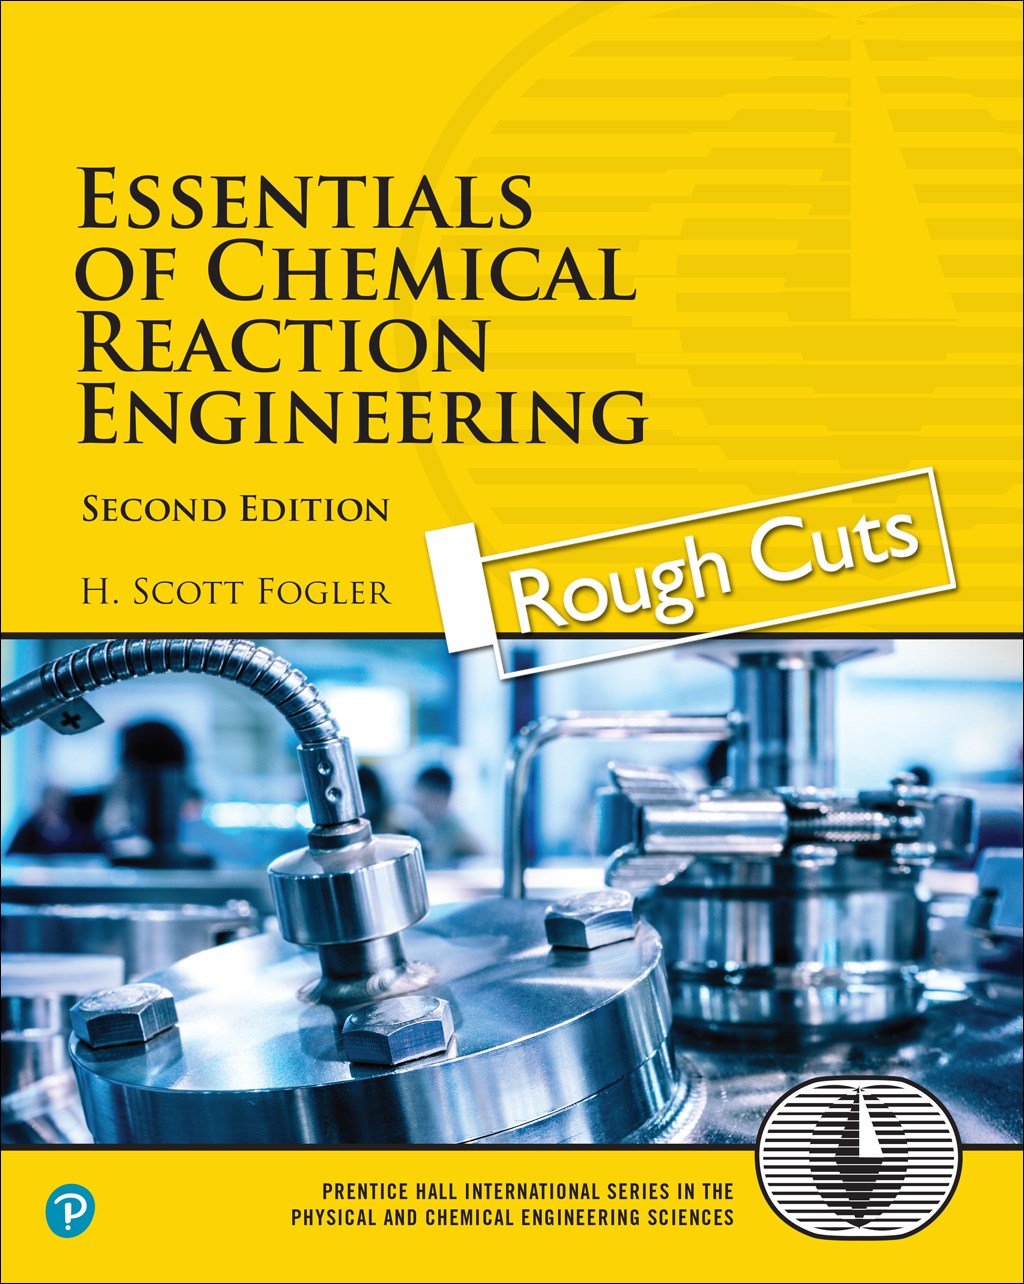 Essentials of Chemical Reaction Engineering, Rough Cuts, 2nd Edition